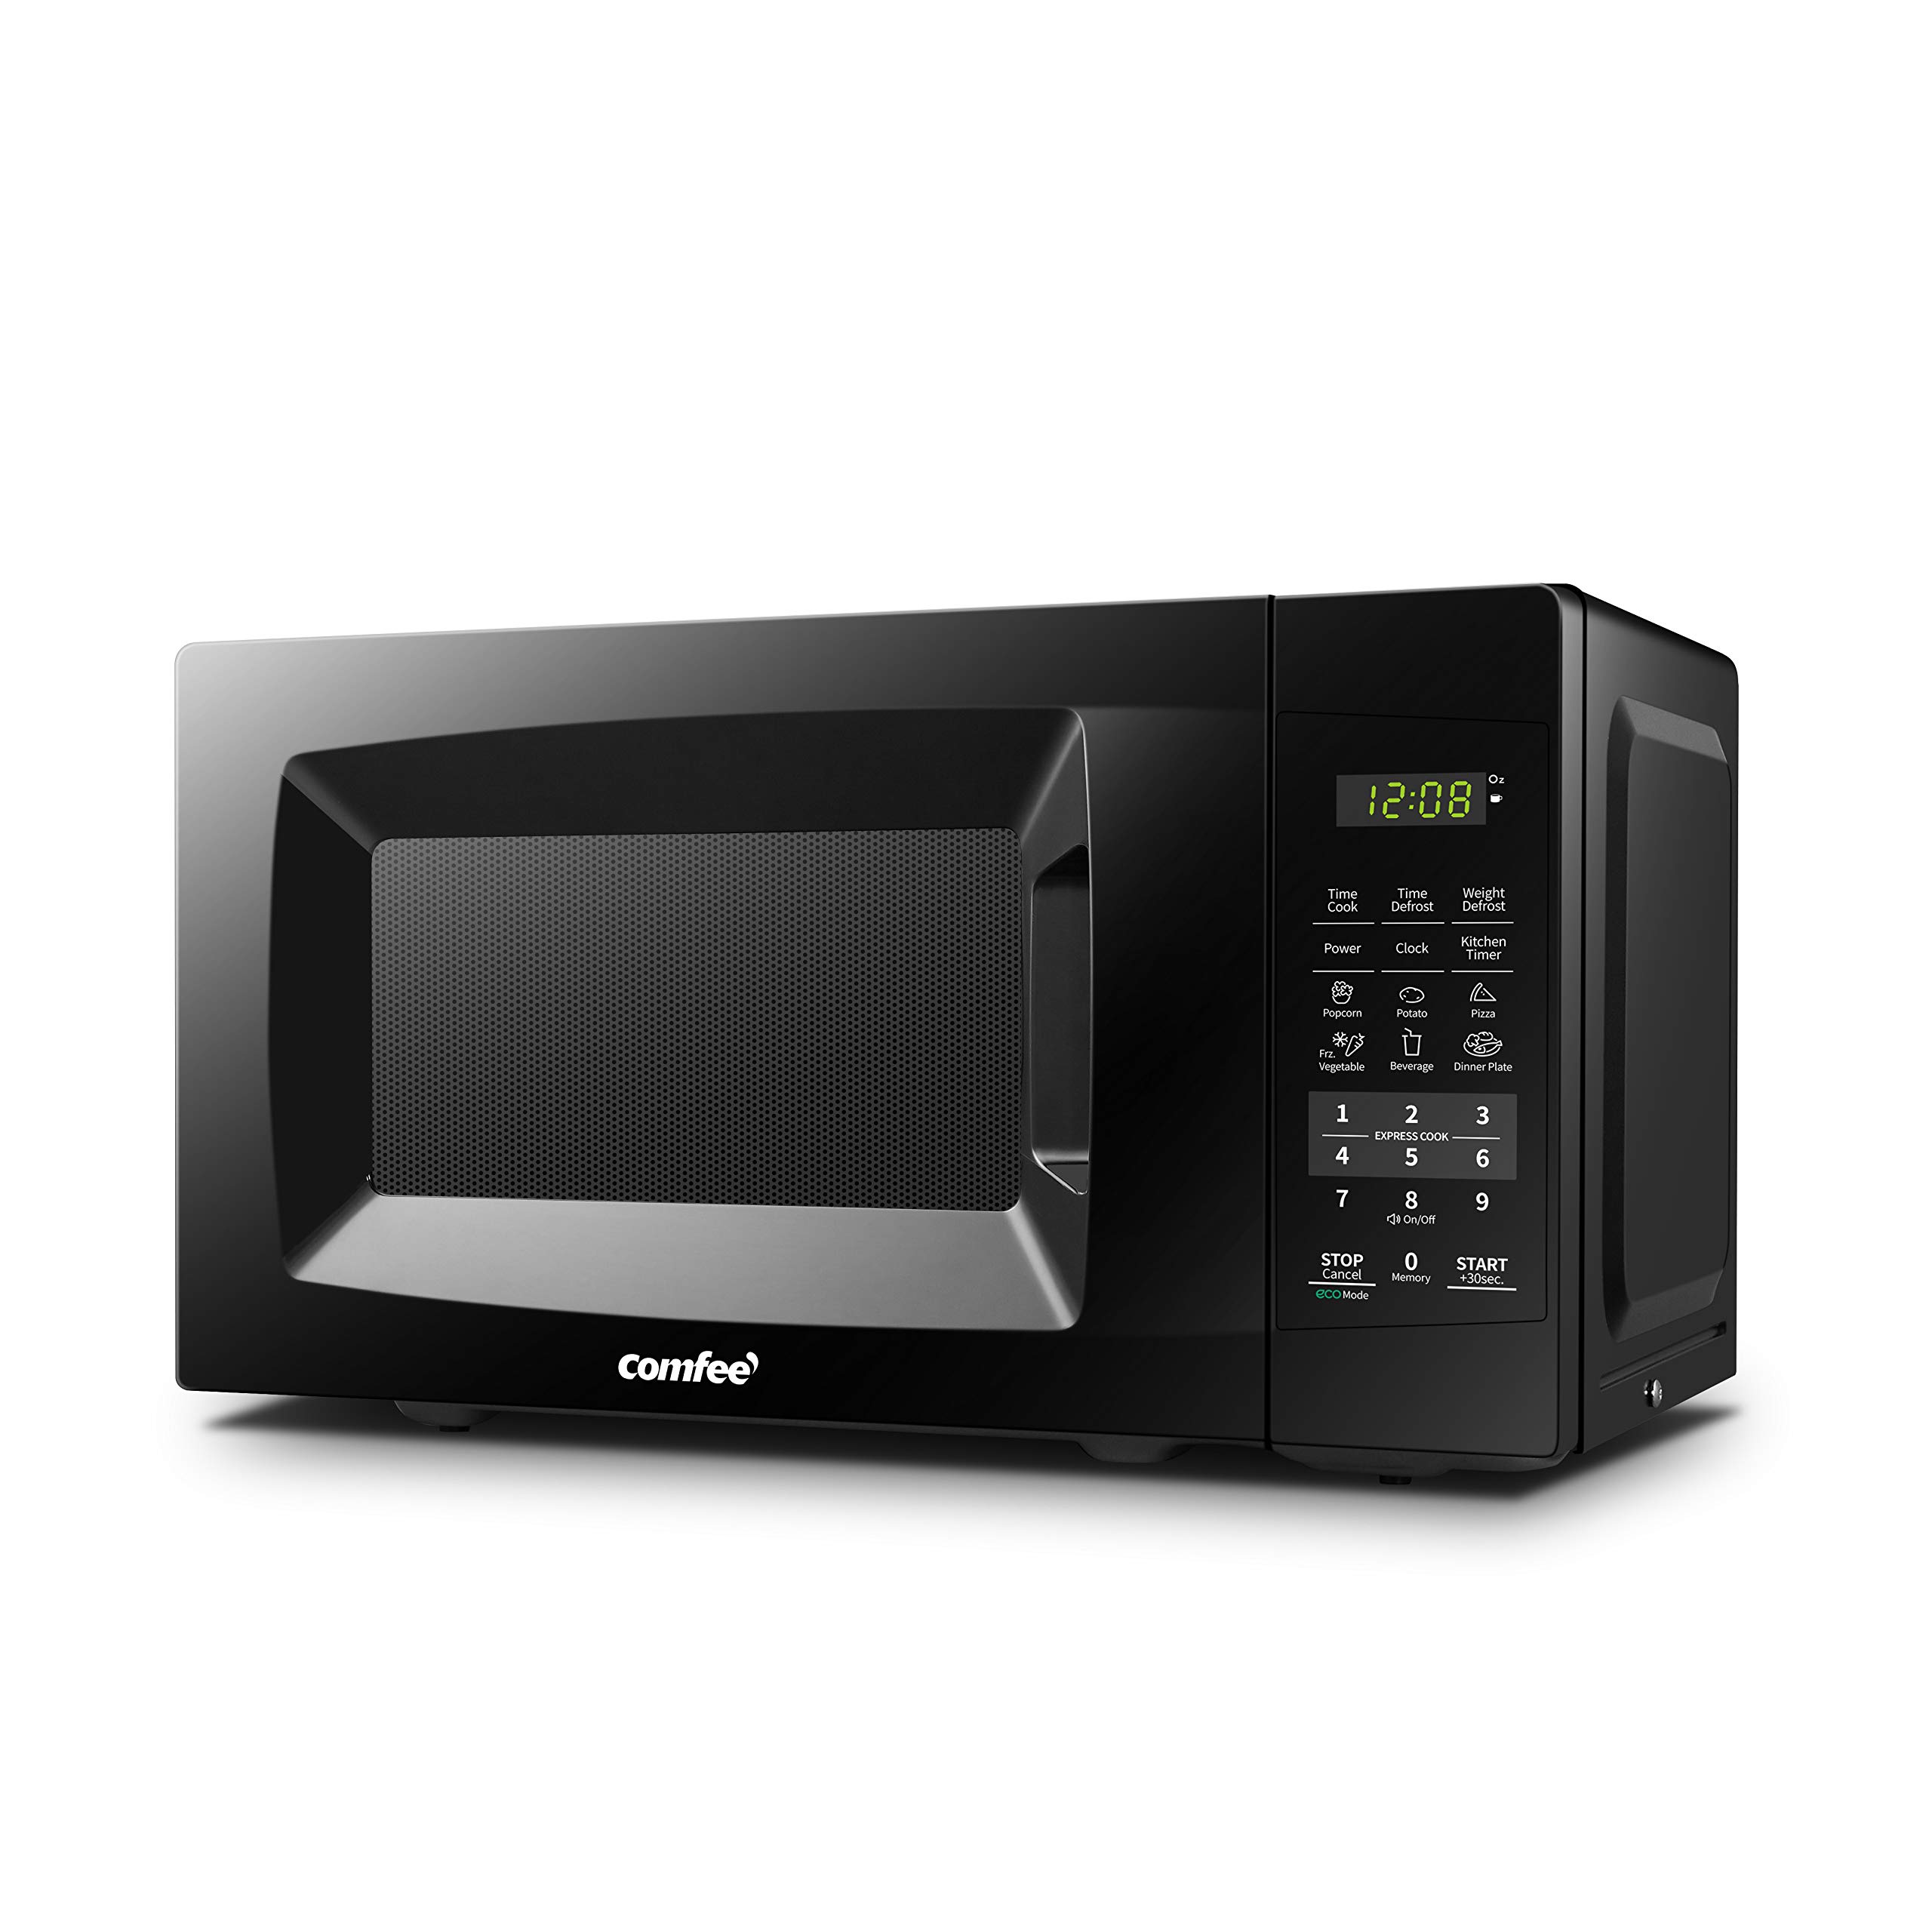 COMFEE' Retro Small Microwave Oven With Compact Size